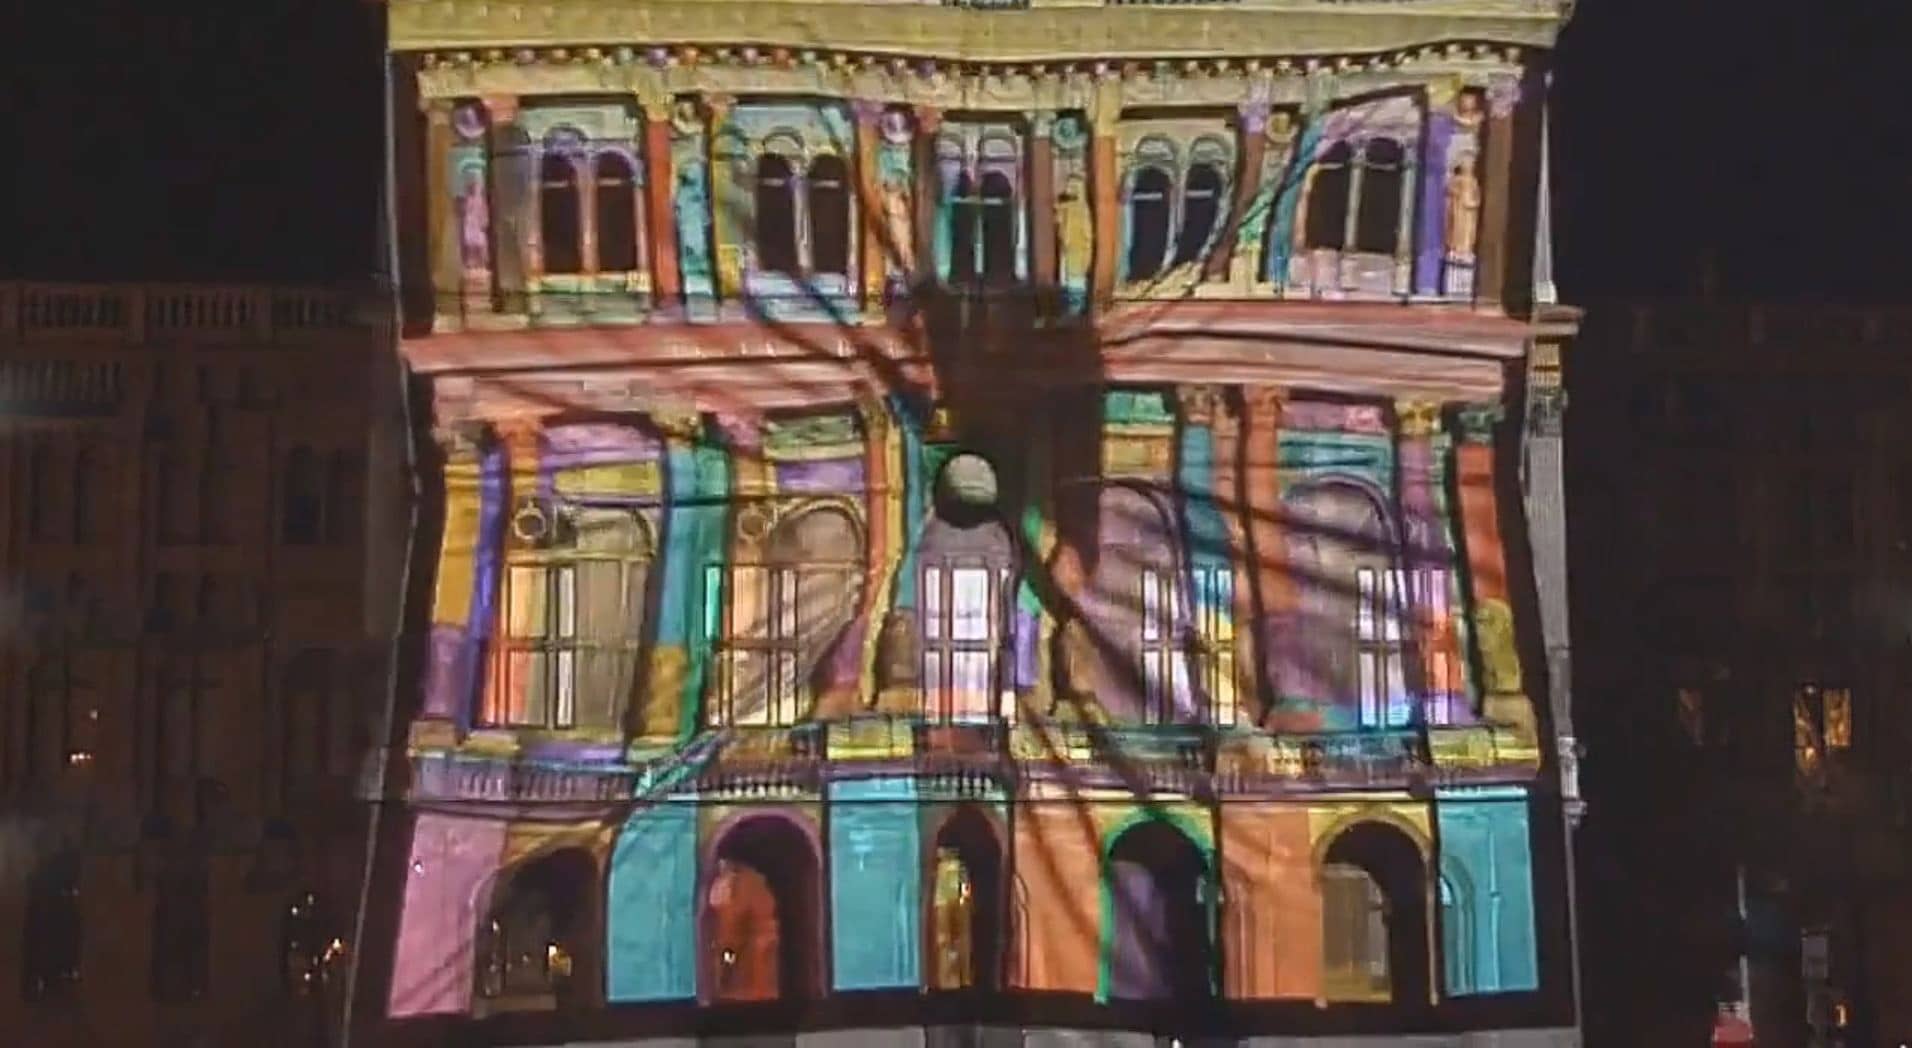 ball hiting building projected on building